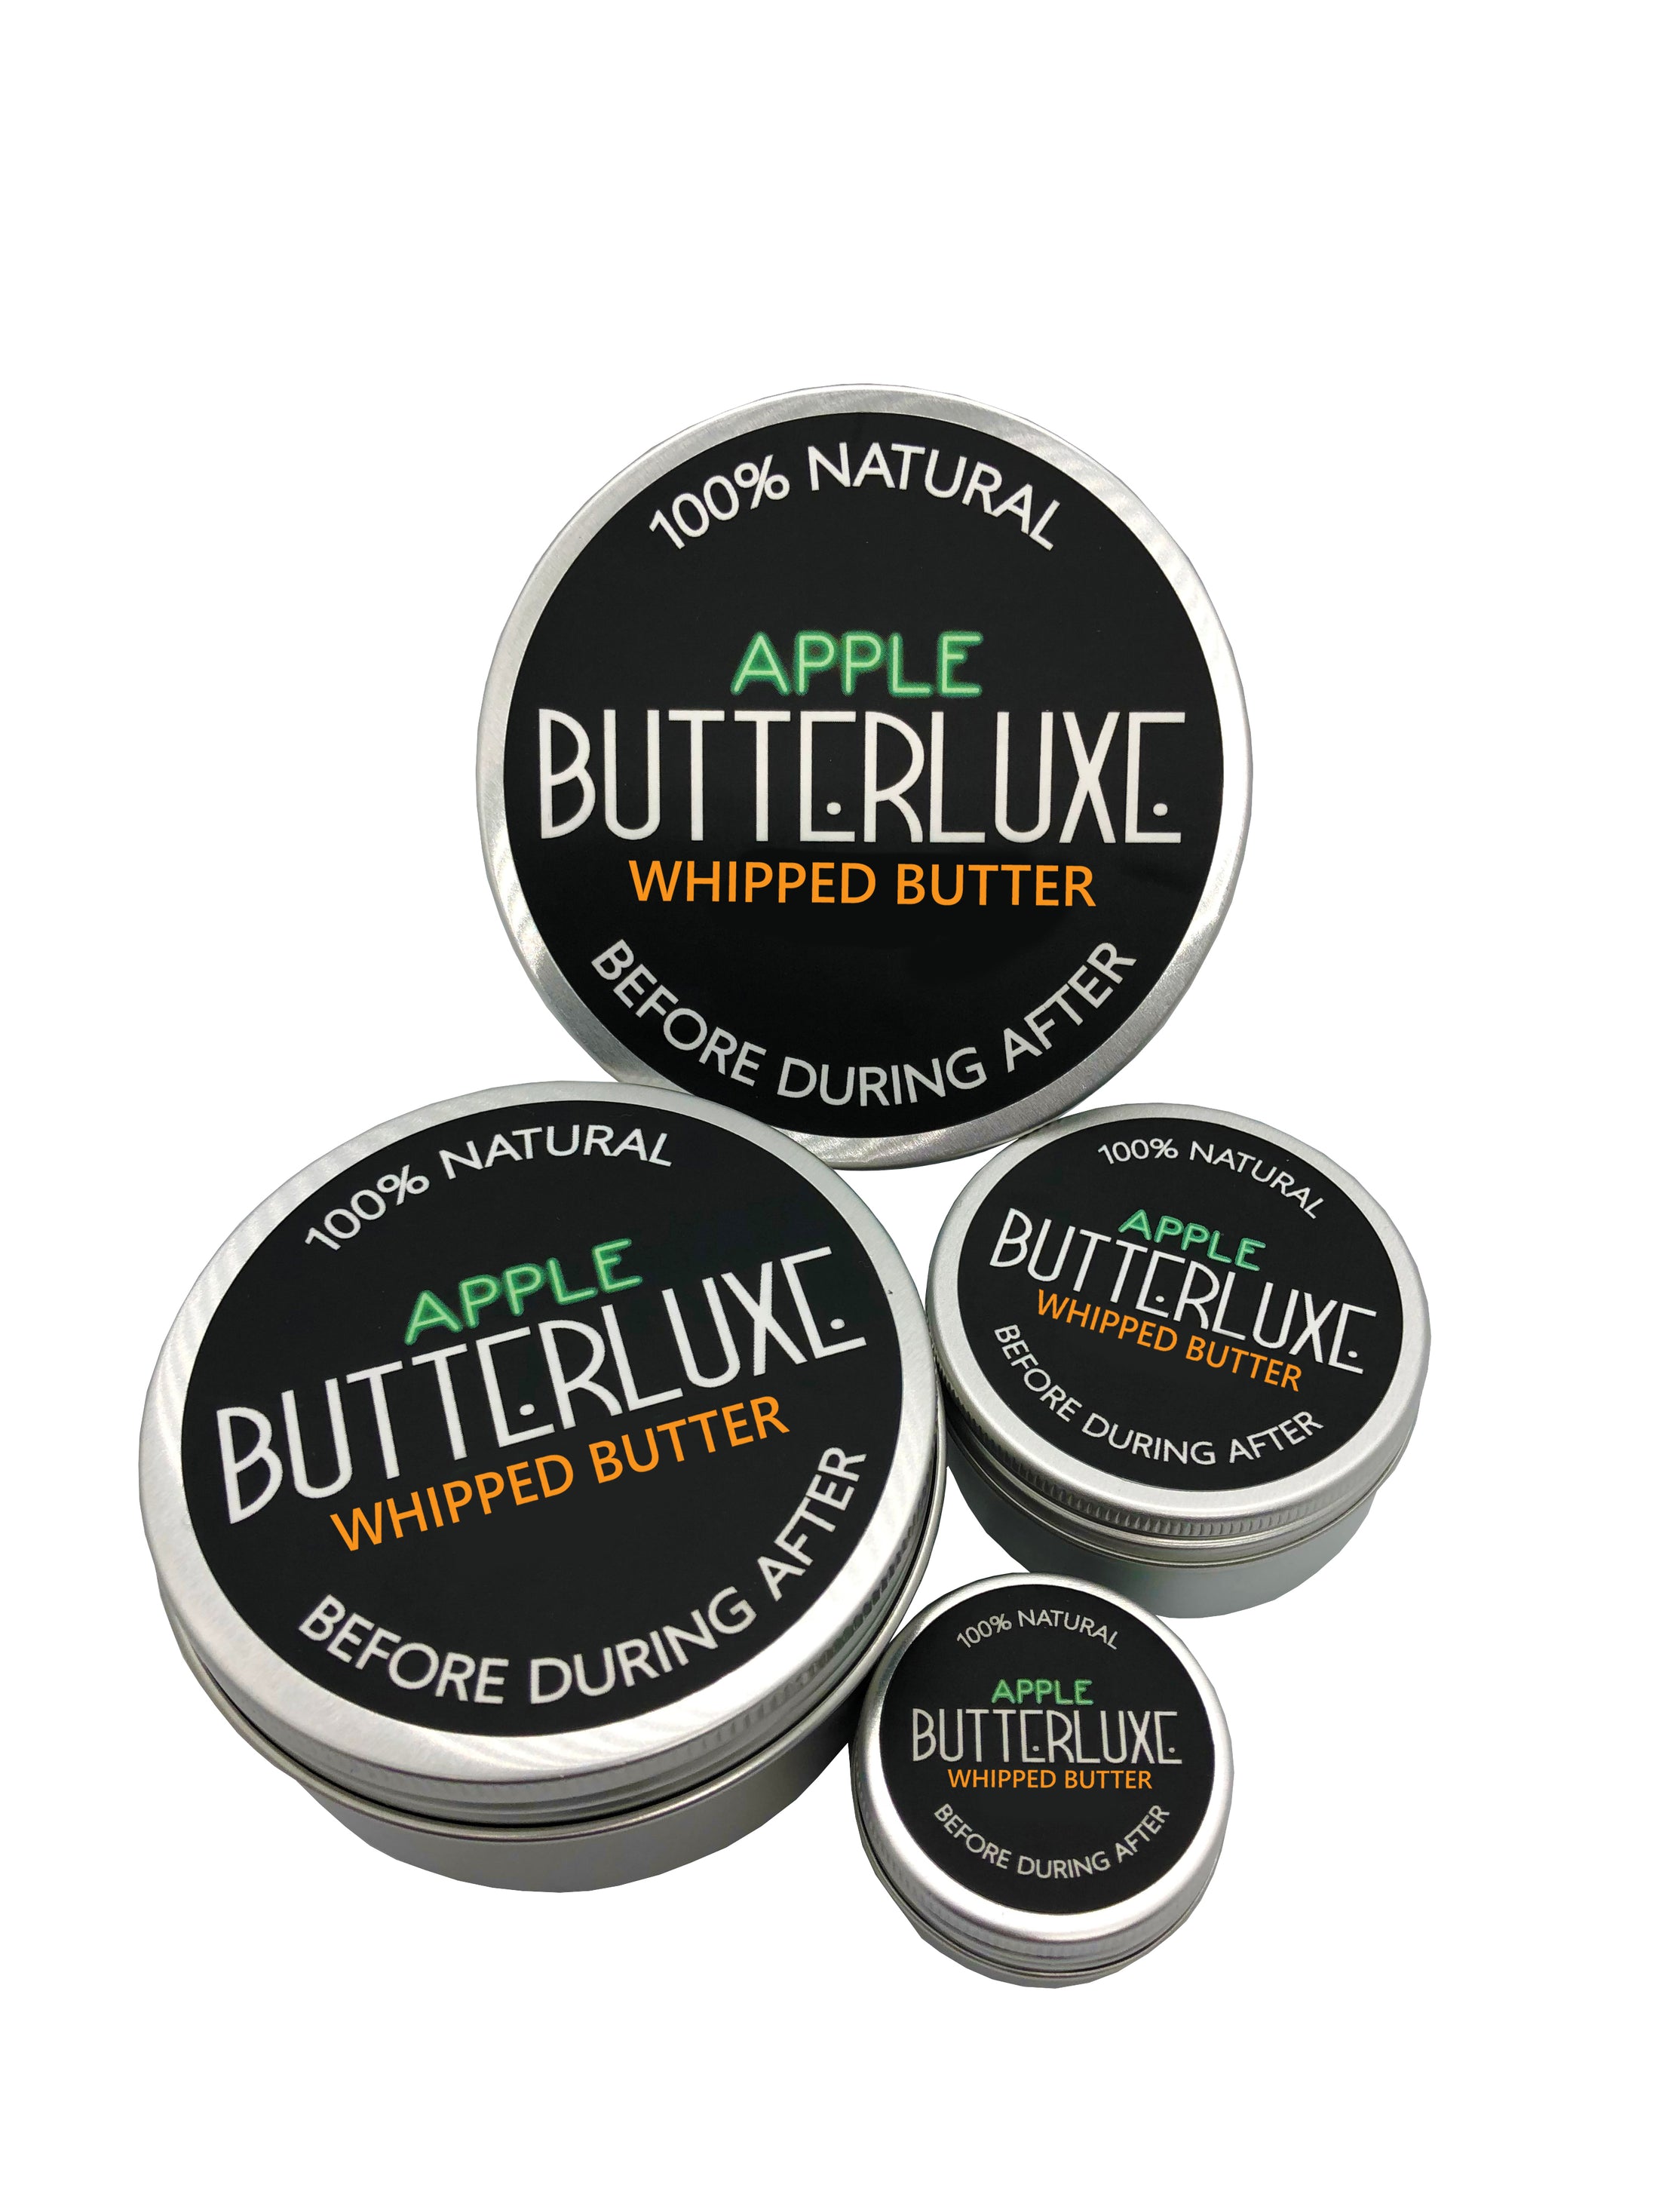 Apple Whipped Butter